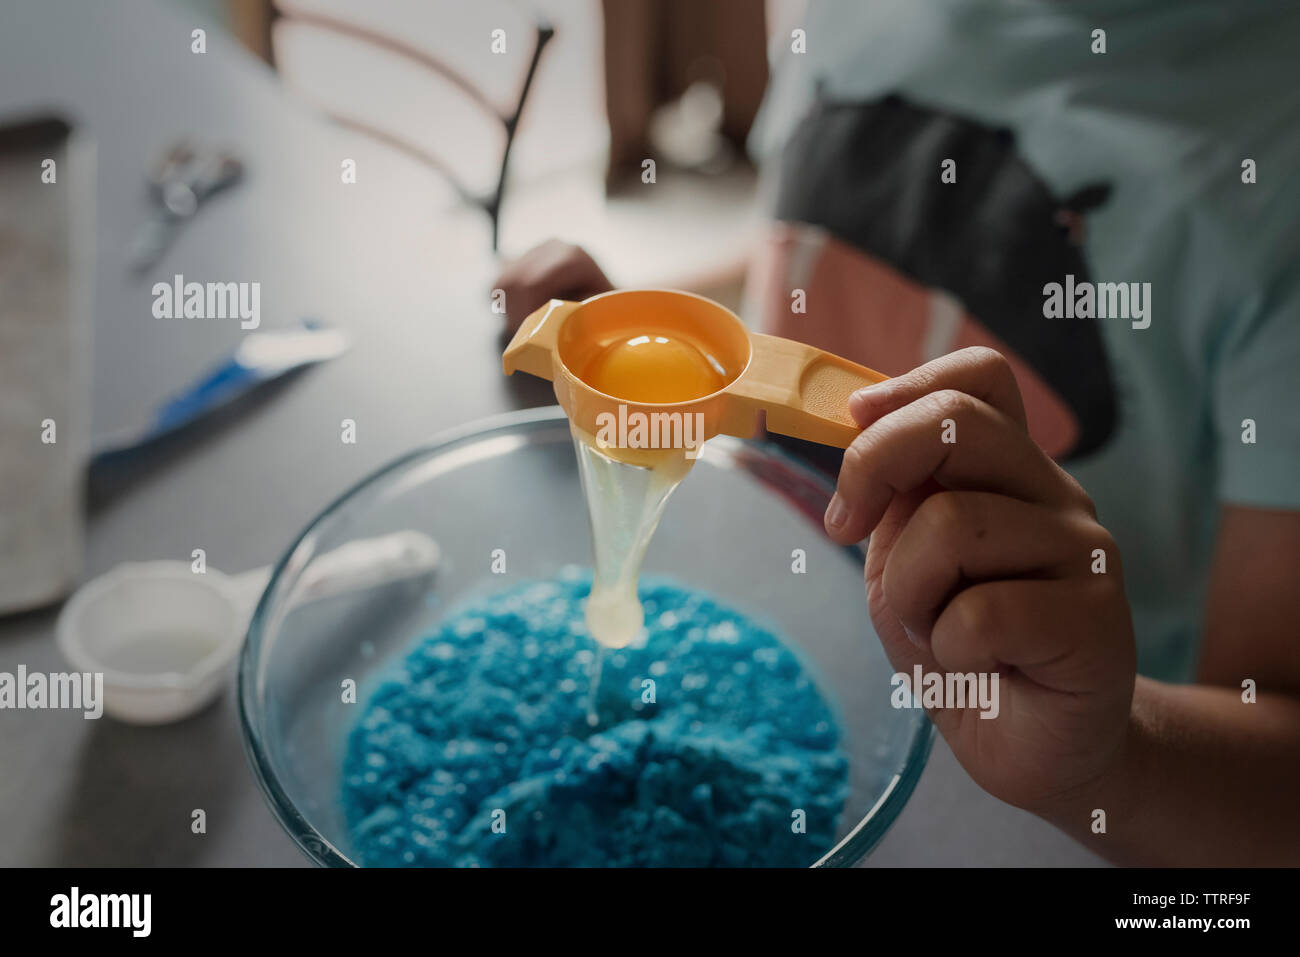 Cropped hand of boy filtering egg white in bowl while preparing food Stock Photo